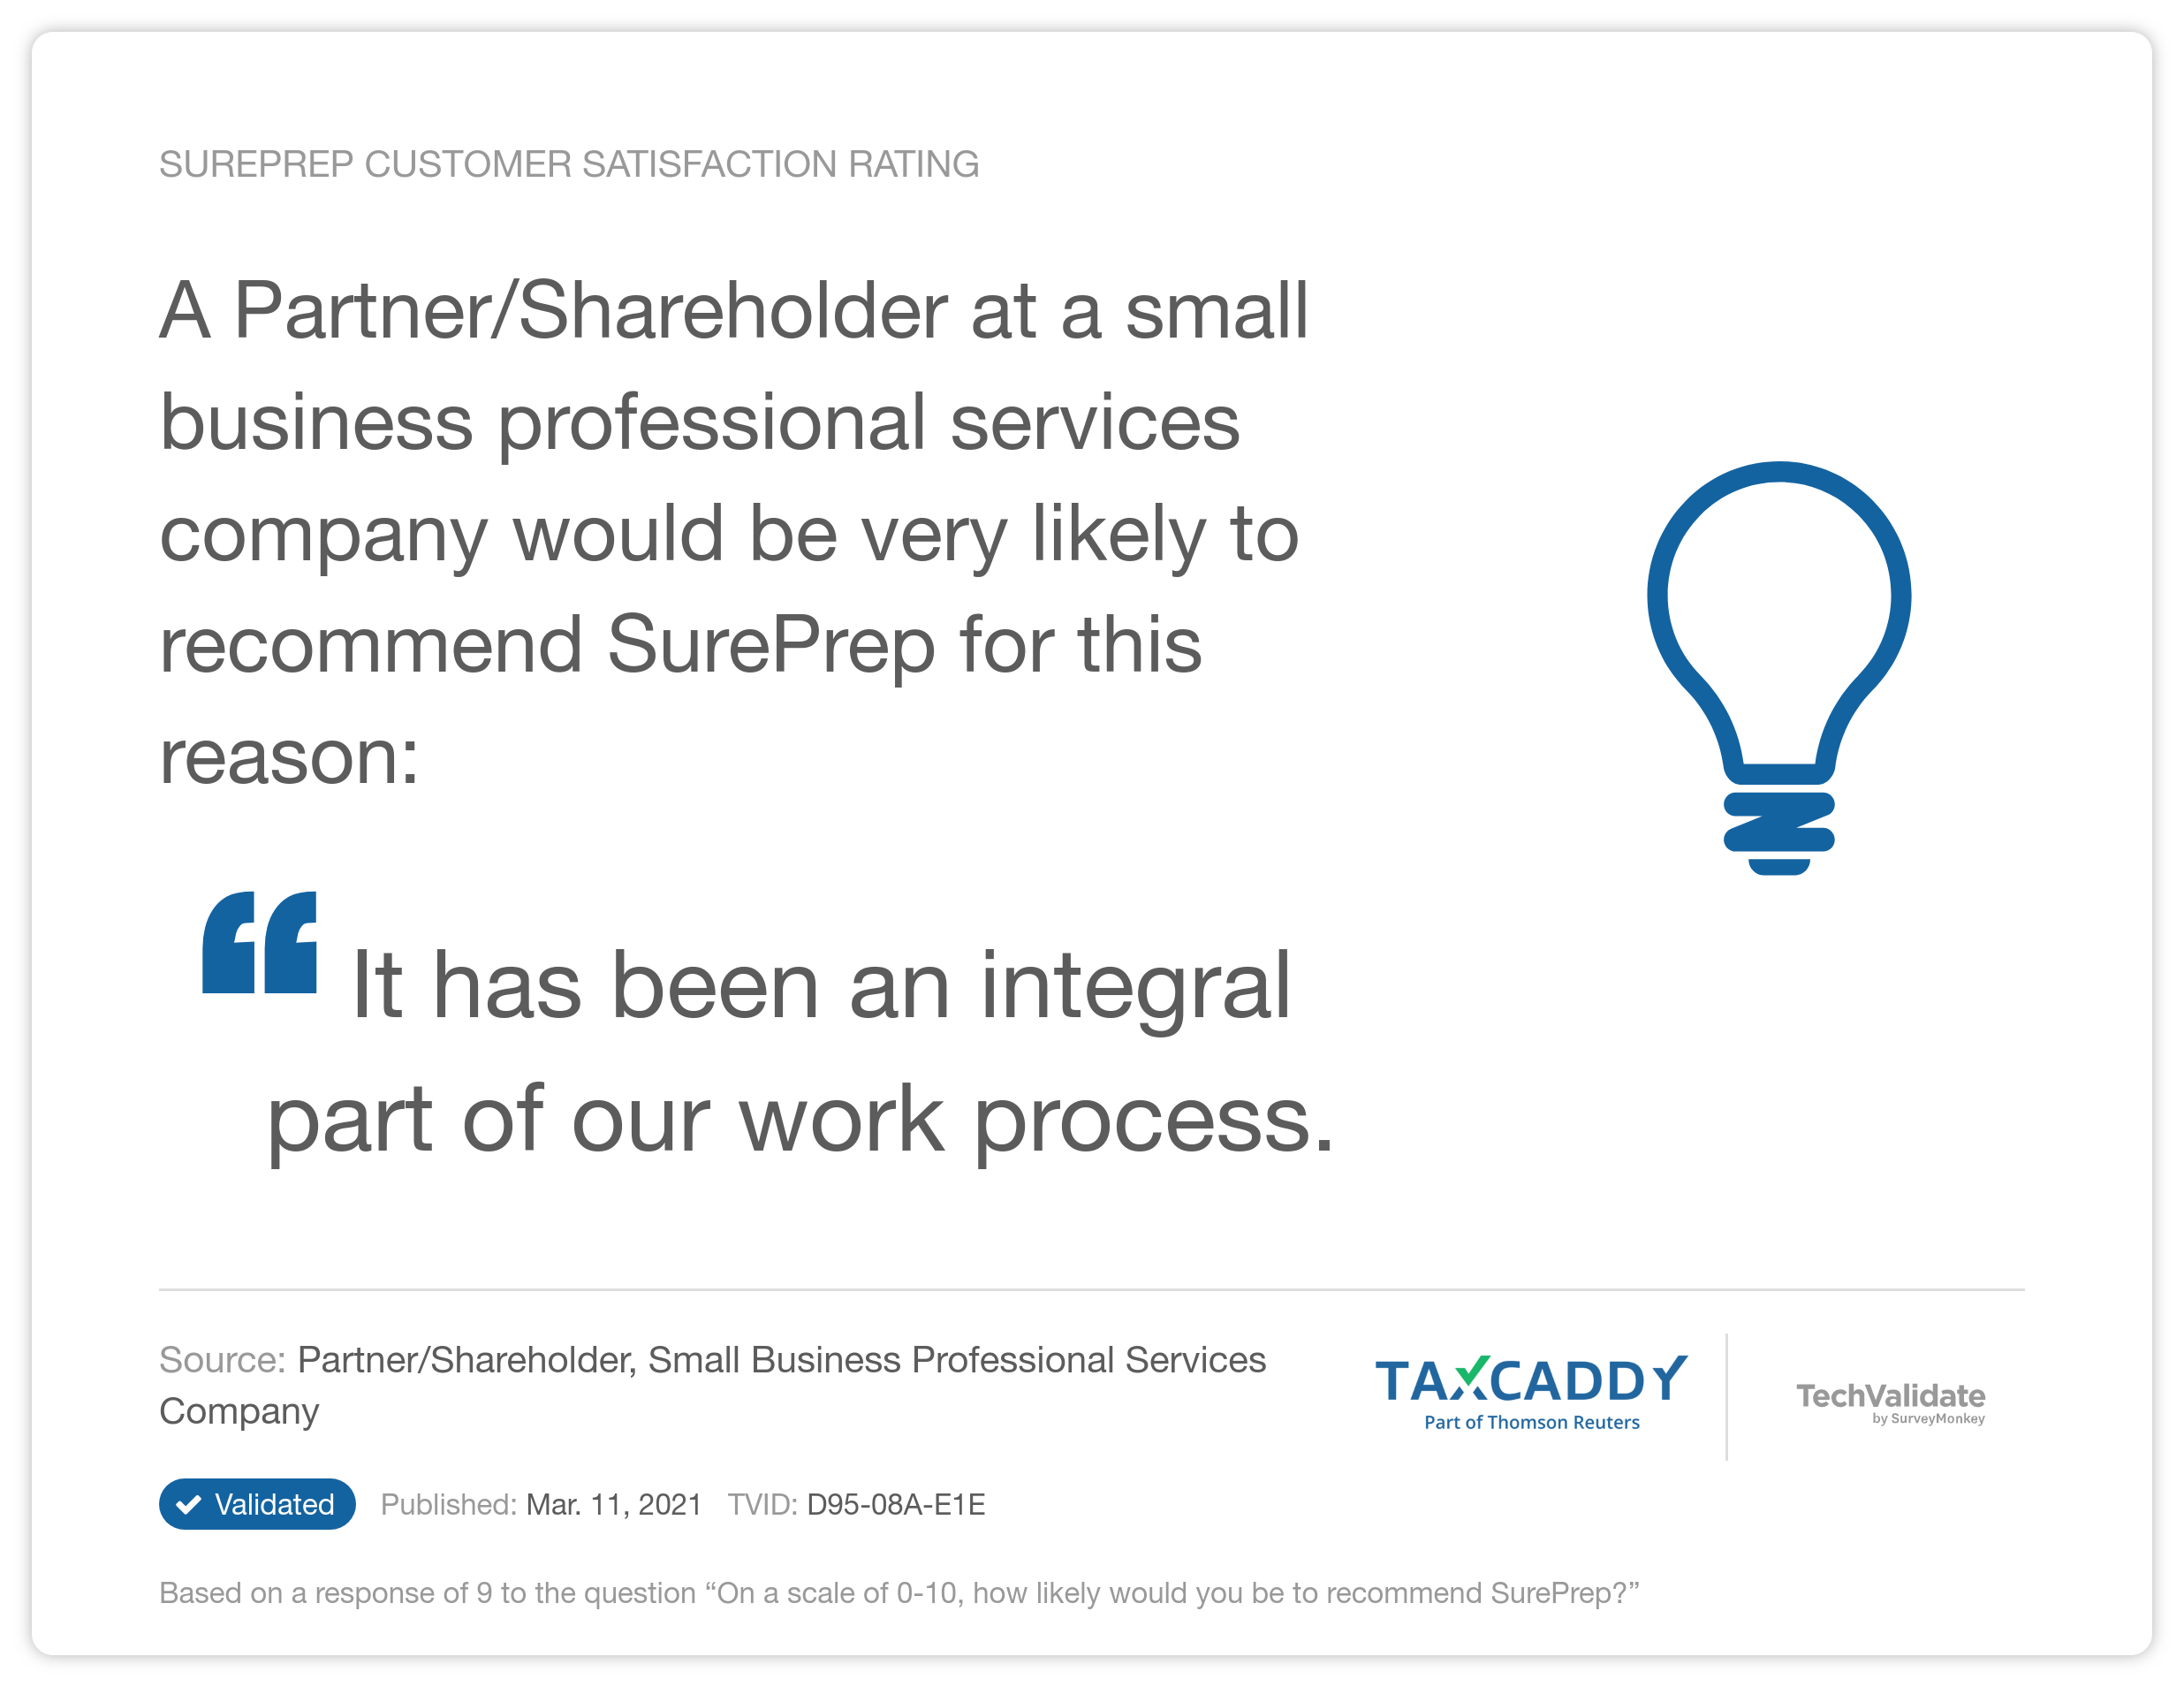 A Partner/Shareholder at a small business professional services company would be very likely to recommend SurePrep for this reason: "It has been an integral part of our work process."